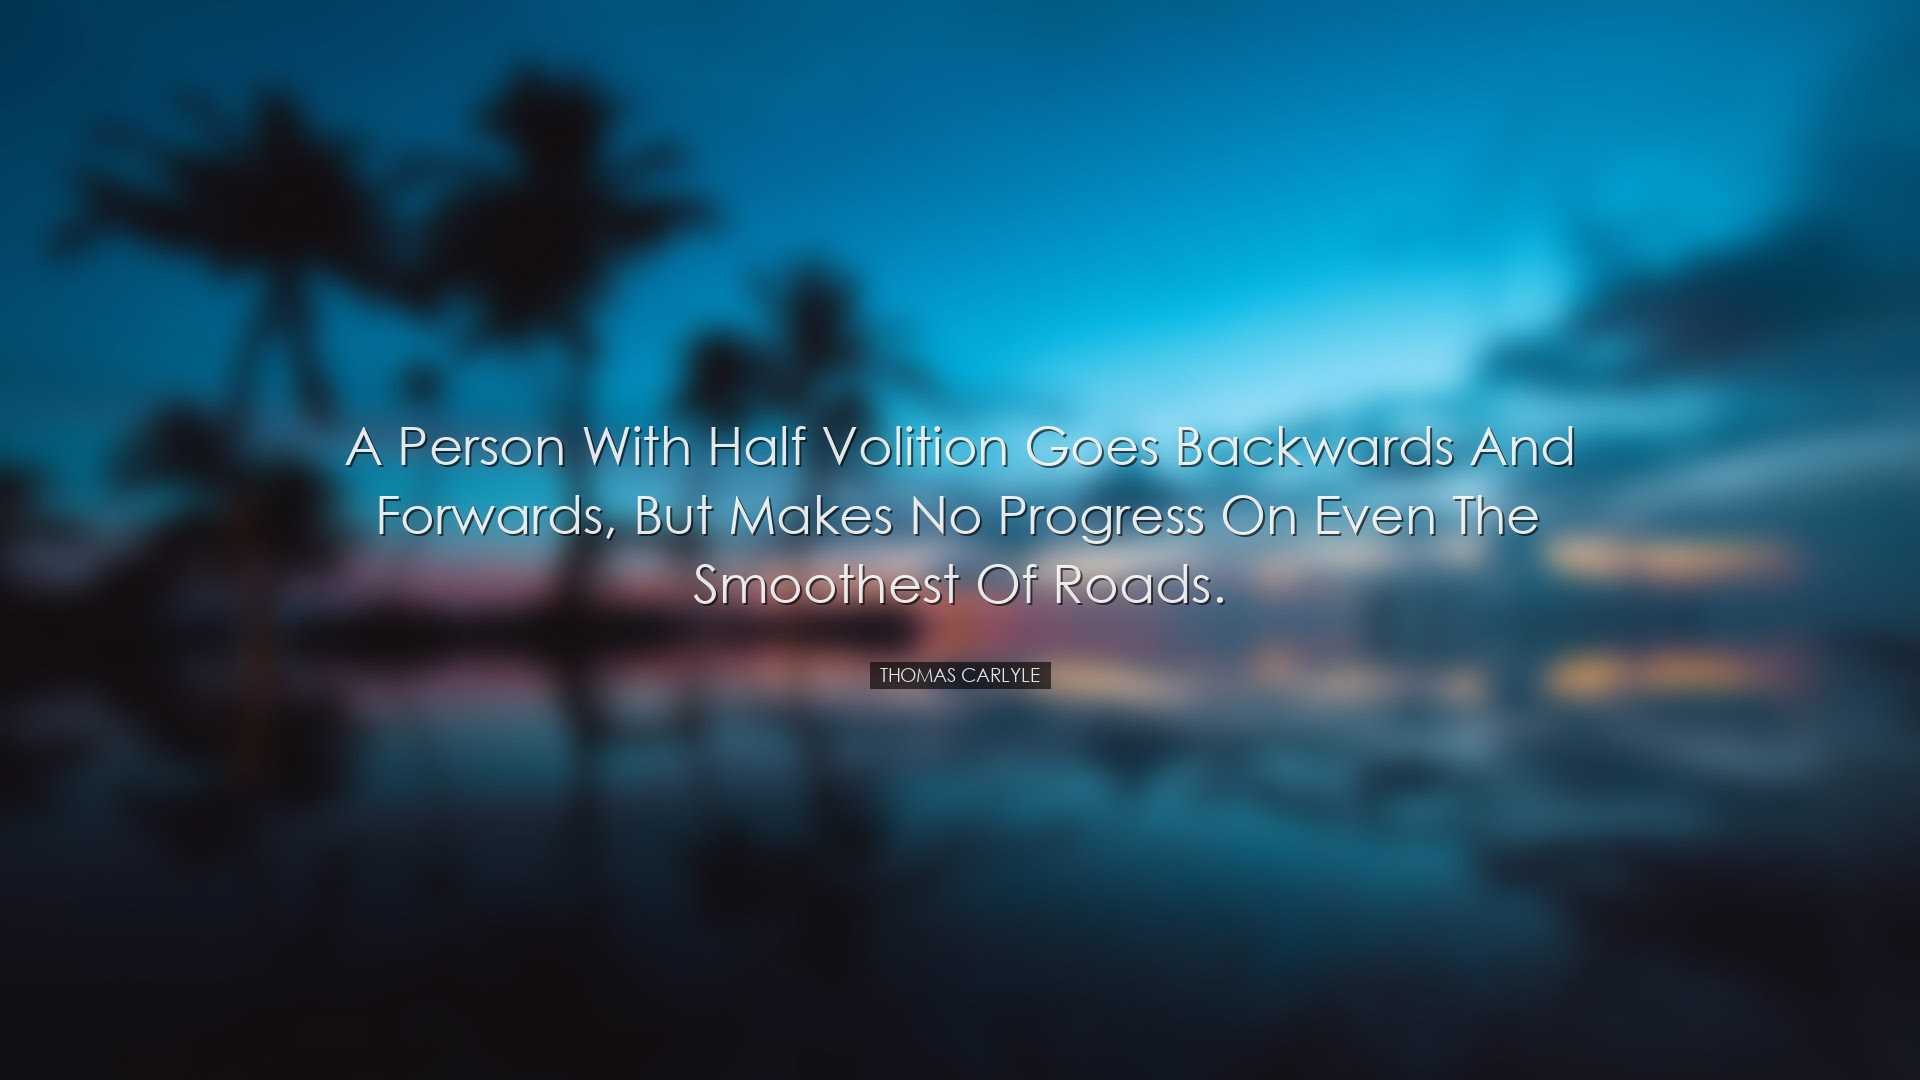 A person with half volition goes backwards and forwards, but makes